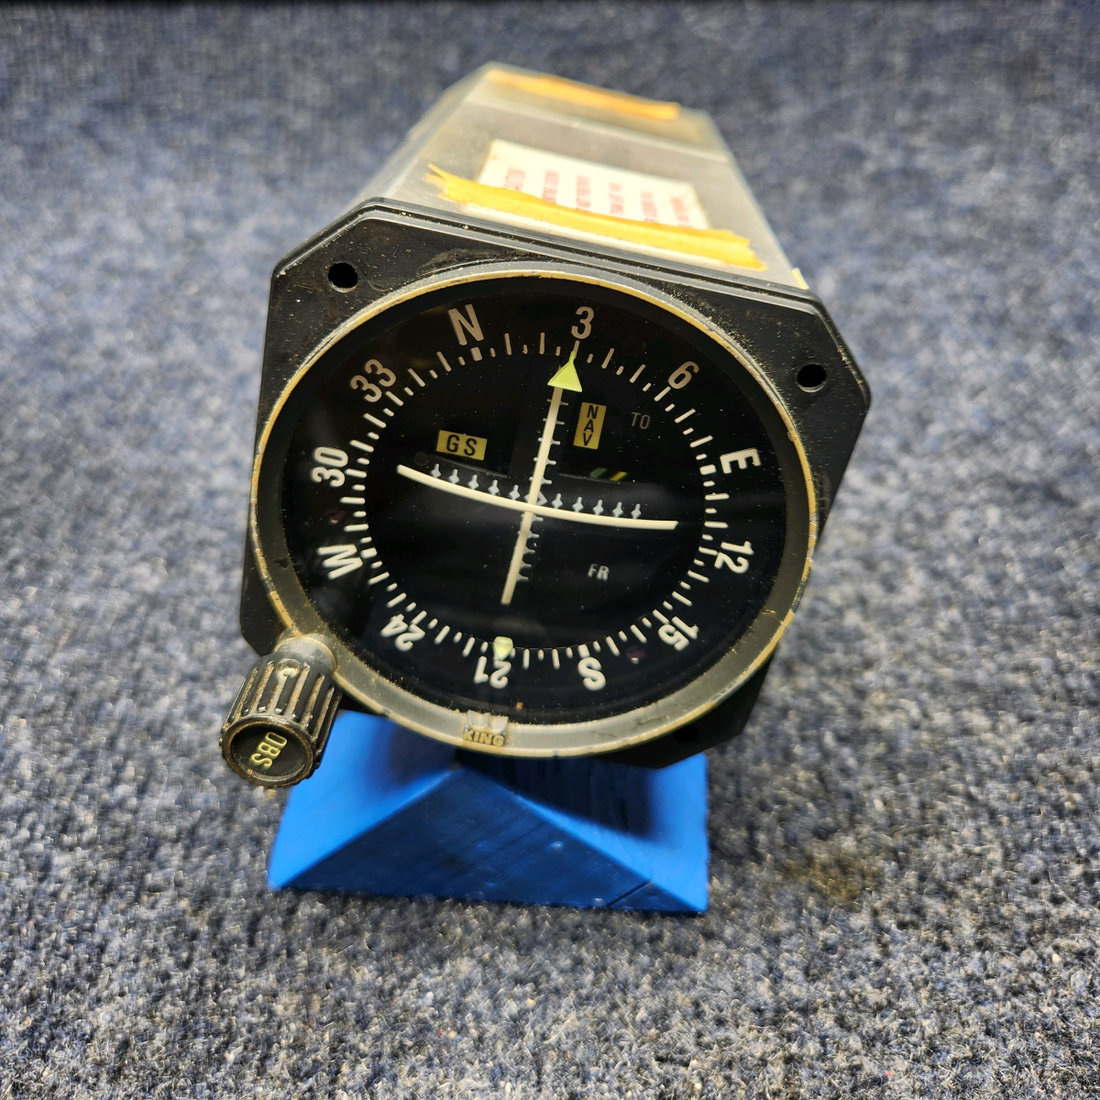 Used aircraft parts for sale, 066-3034-02 Mooney M20J KING KI 294 VOR LOG INDICATOR W/ GS AND CONNECTOR